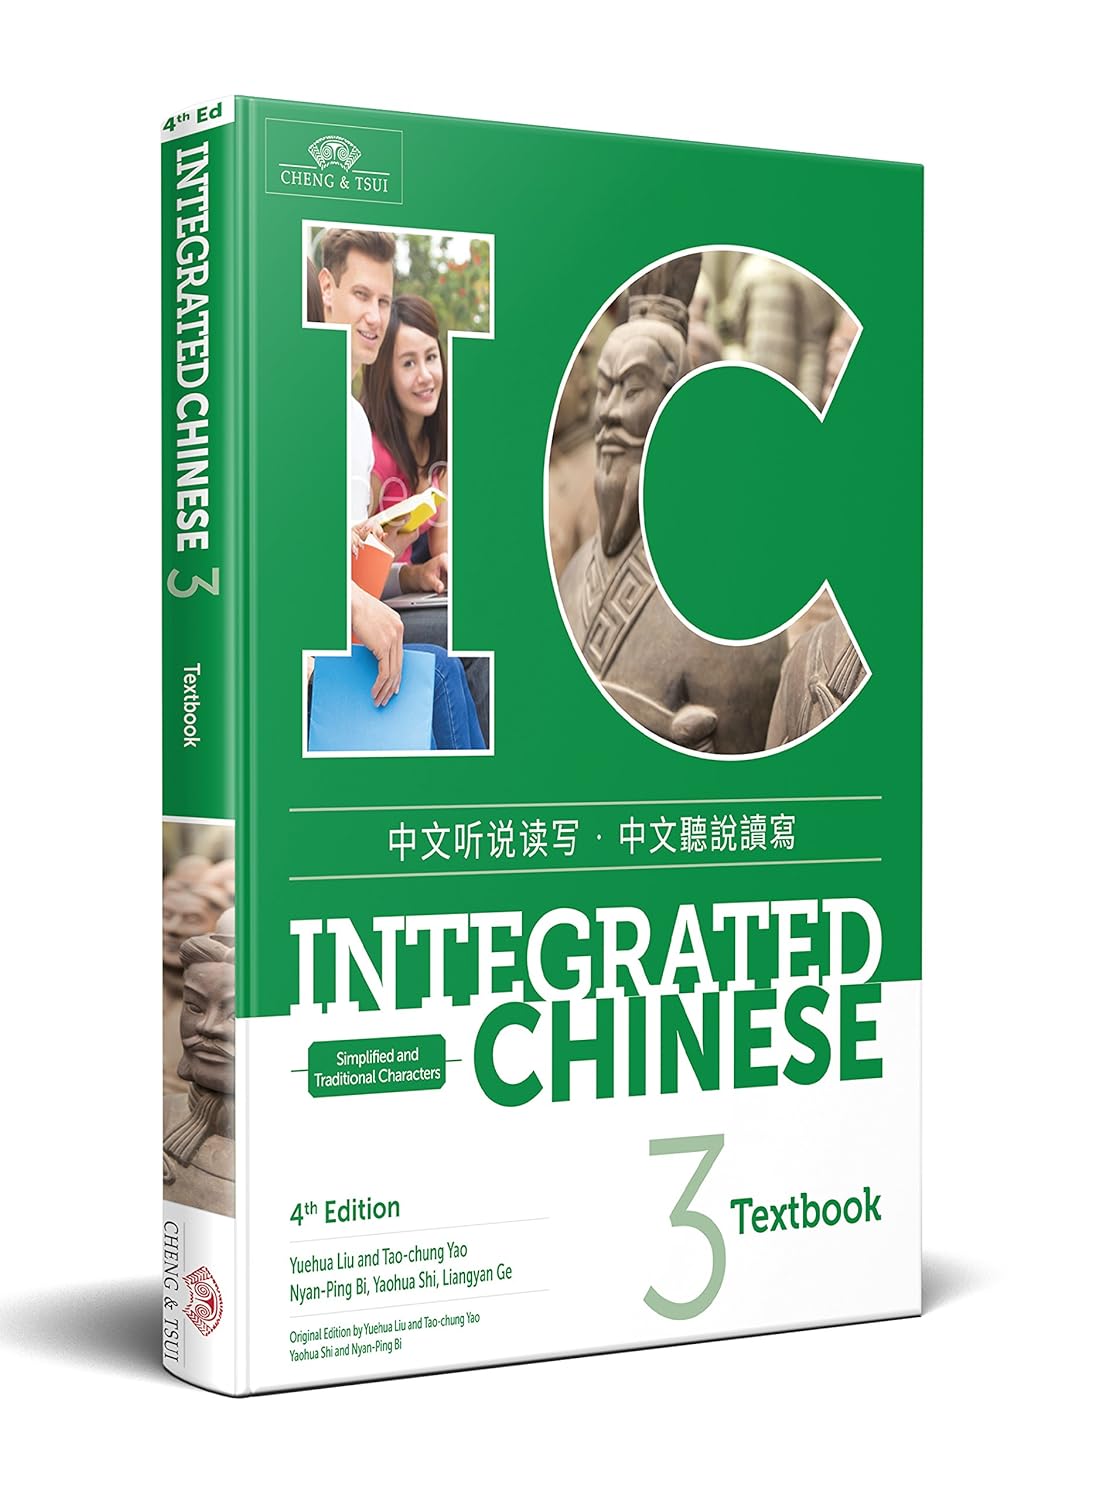 Integrated Chinese 3- Textbook (Simplified Chinese)(4th Edition)